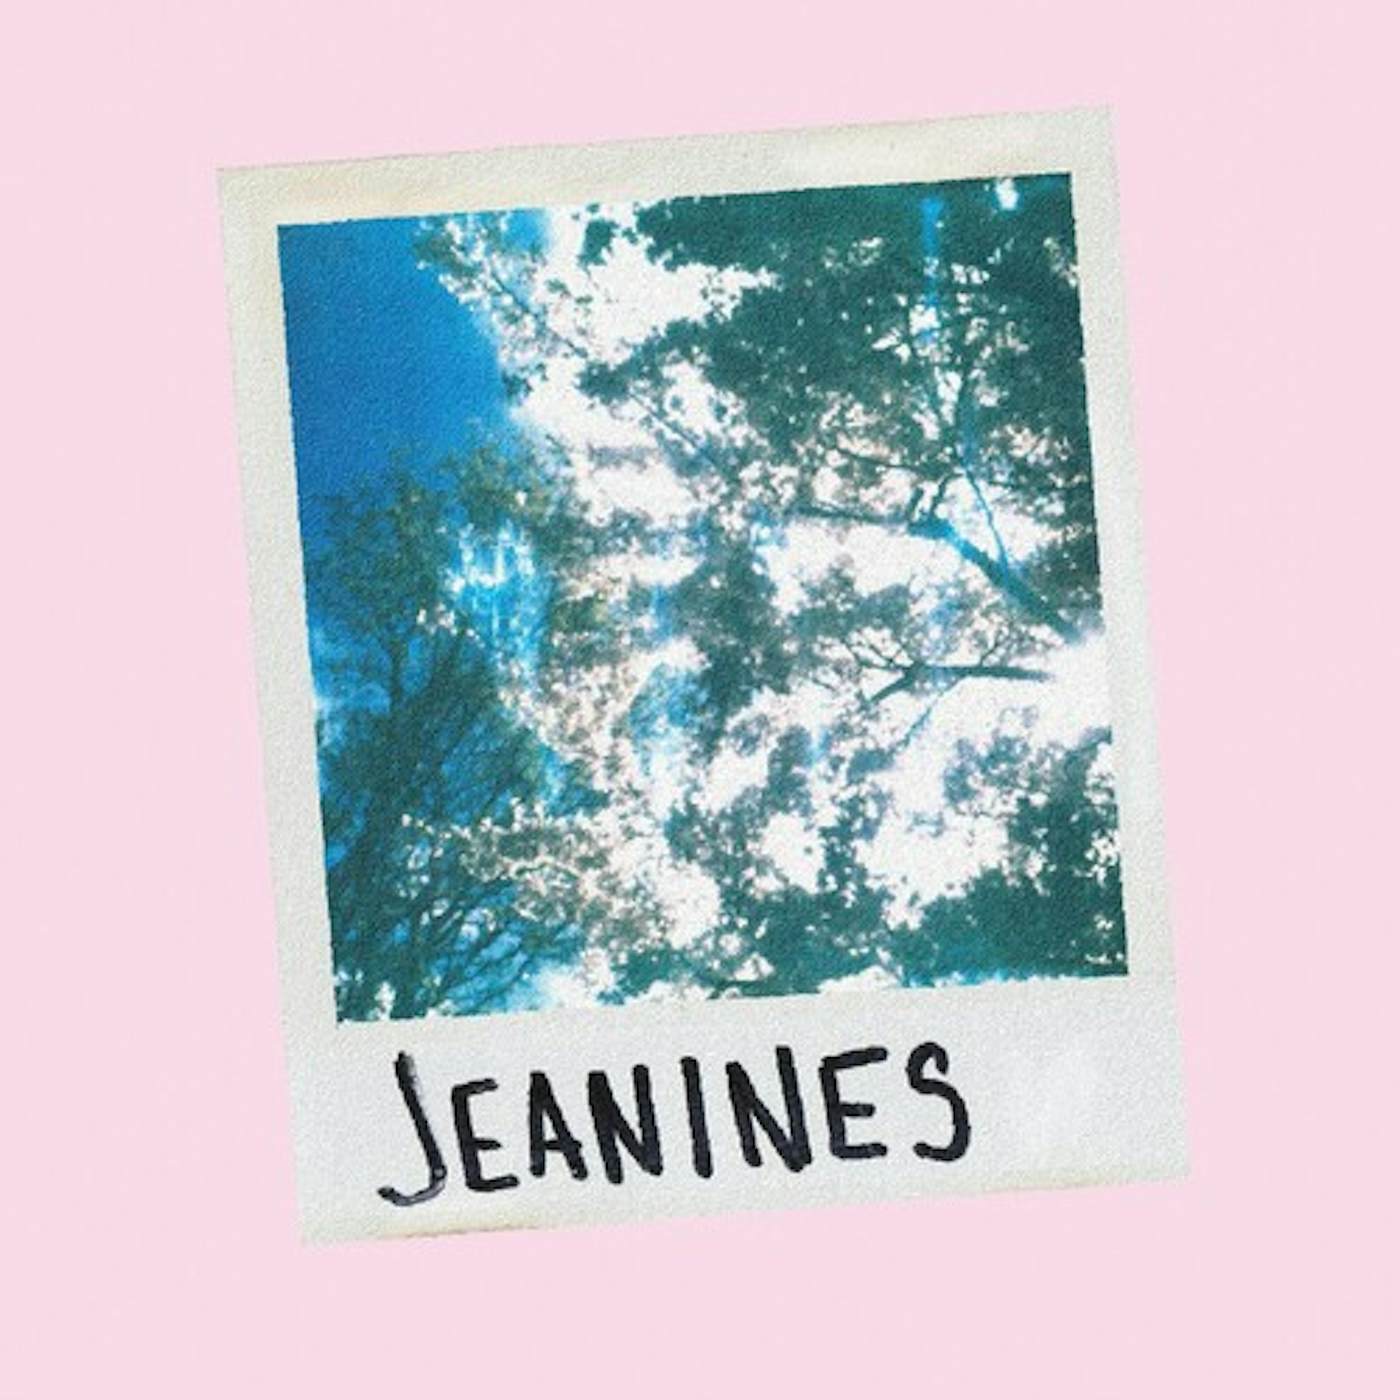 Jeanines EACH DAY Vinyl Record